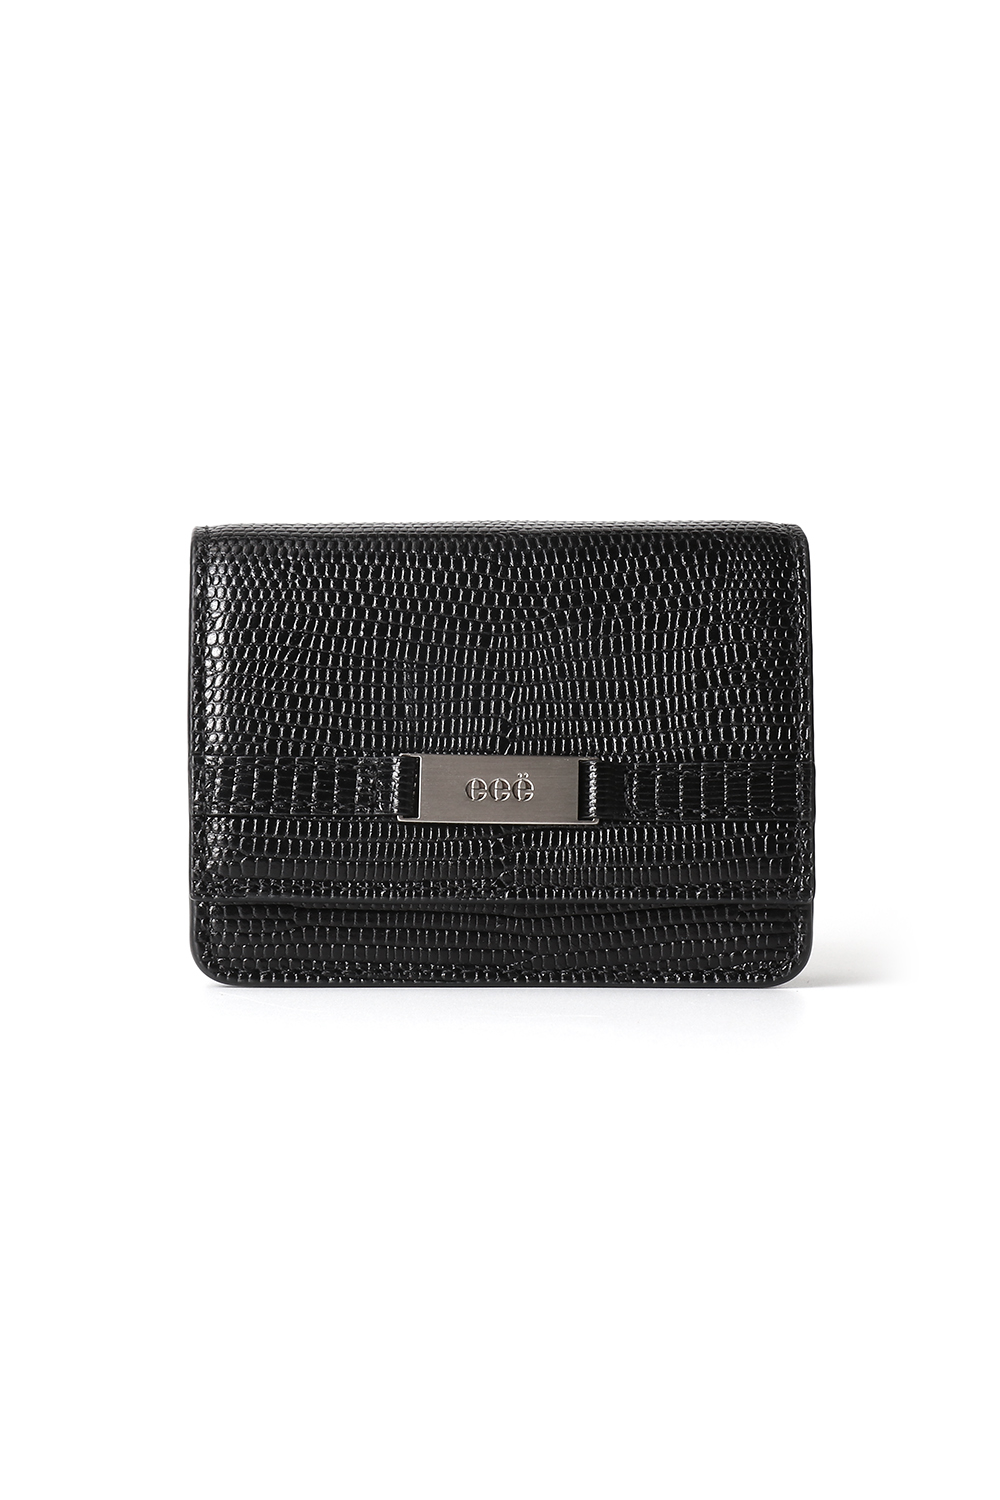 PEPE CHAIN CARD WALLET [BLACK]